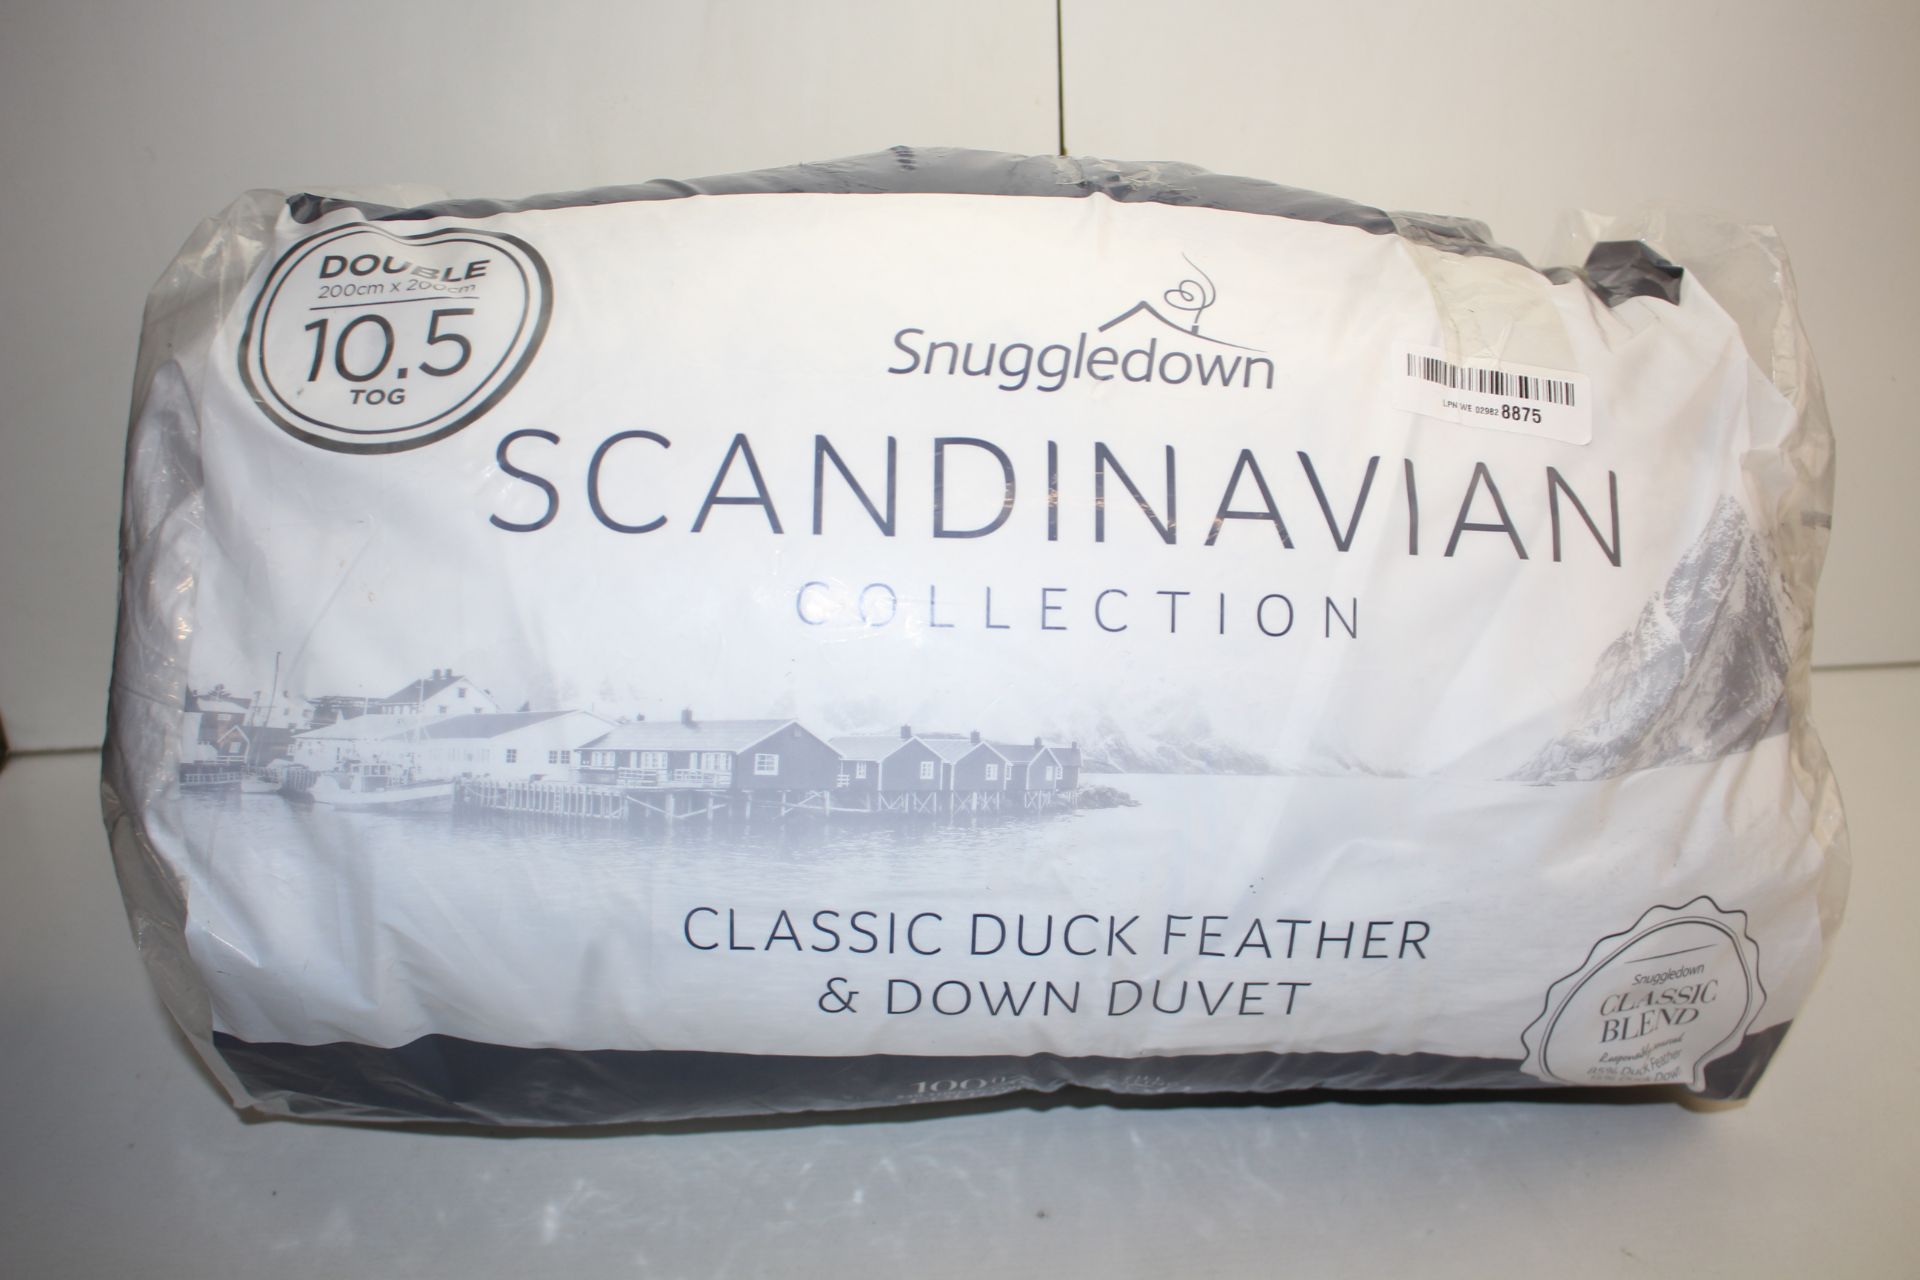 BAGGED SNUGGLEDOWN SCANDINAVIAN COLLECTION CLASSIC DUCK FEATHER & DOWN DUVET DOUBLE 10.5TOG RRP £